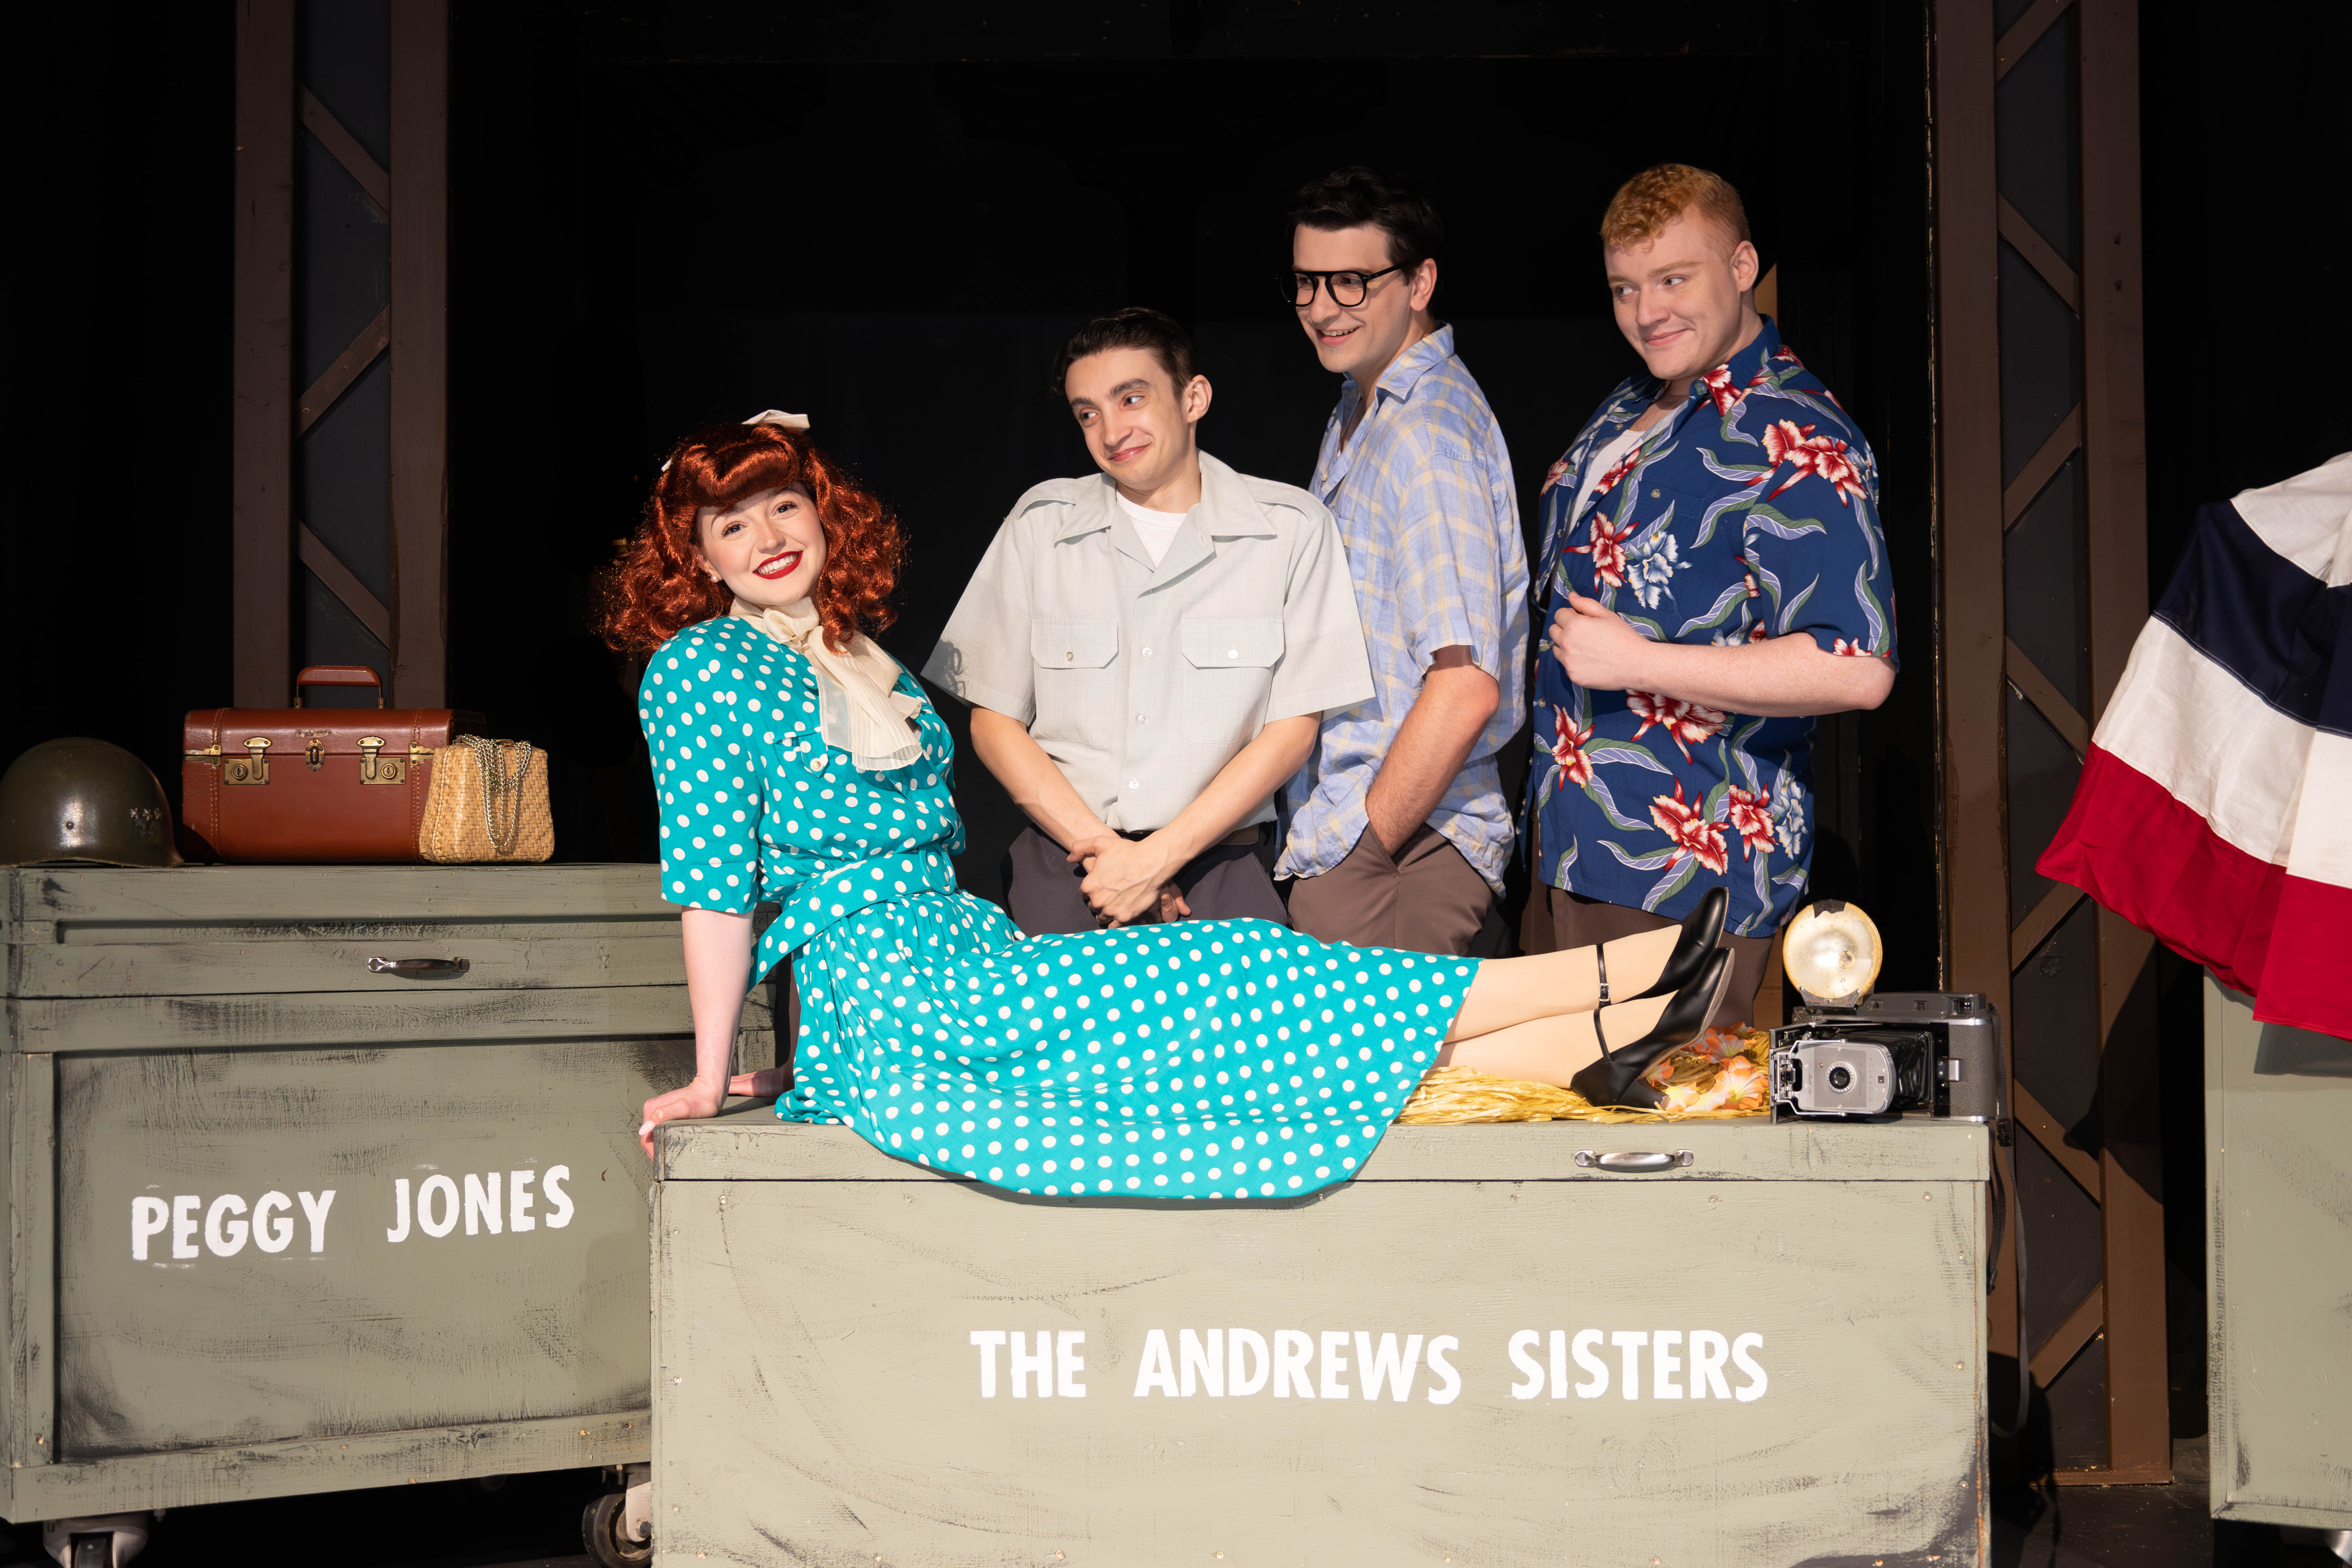 Saint Vincent Summer Theatre returns Tuesday with “The Andrews Brothers”